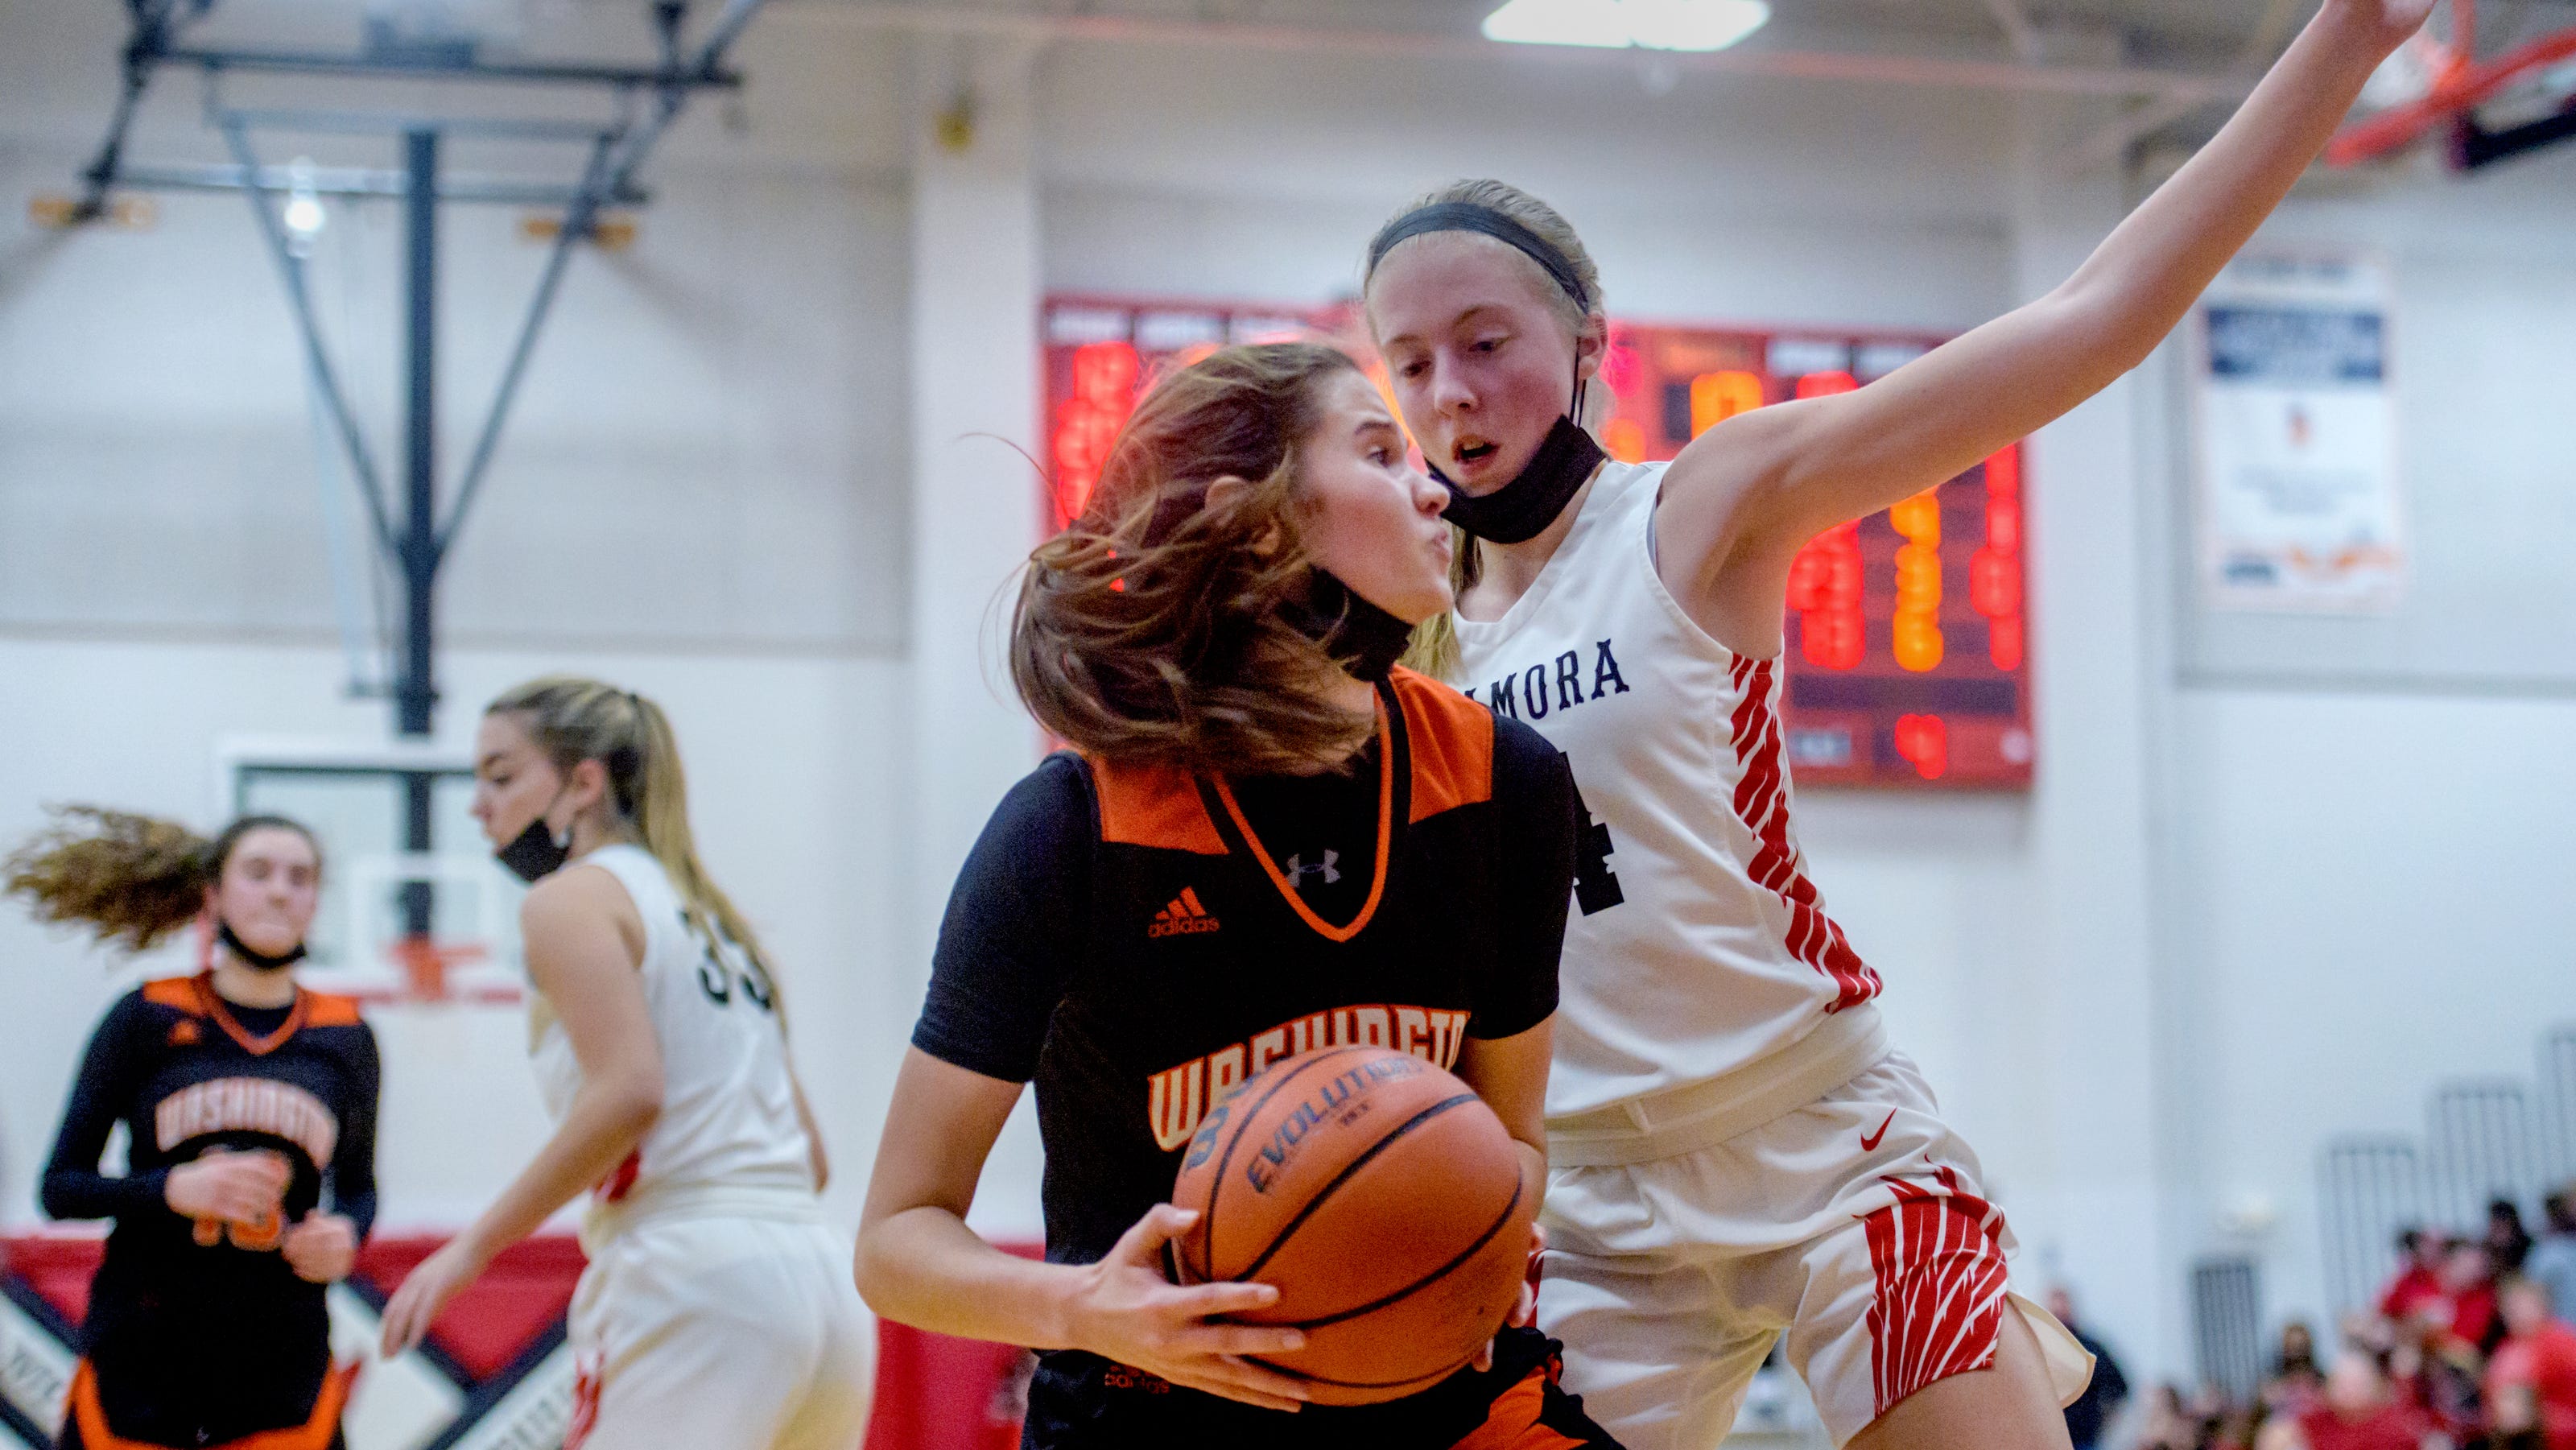   
																Here are the 2022 Mid-Illini all-conference girls basketball teams 
															 